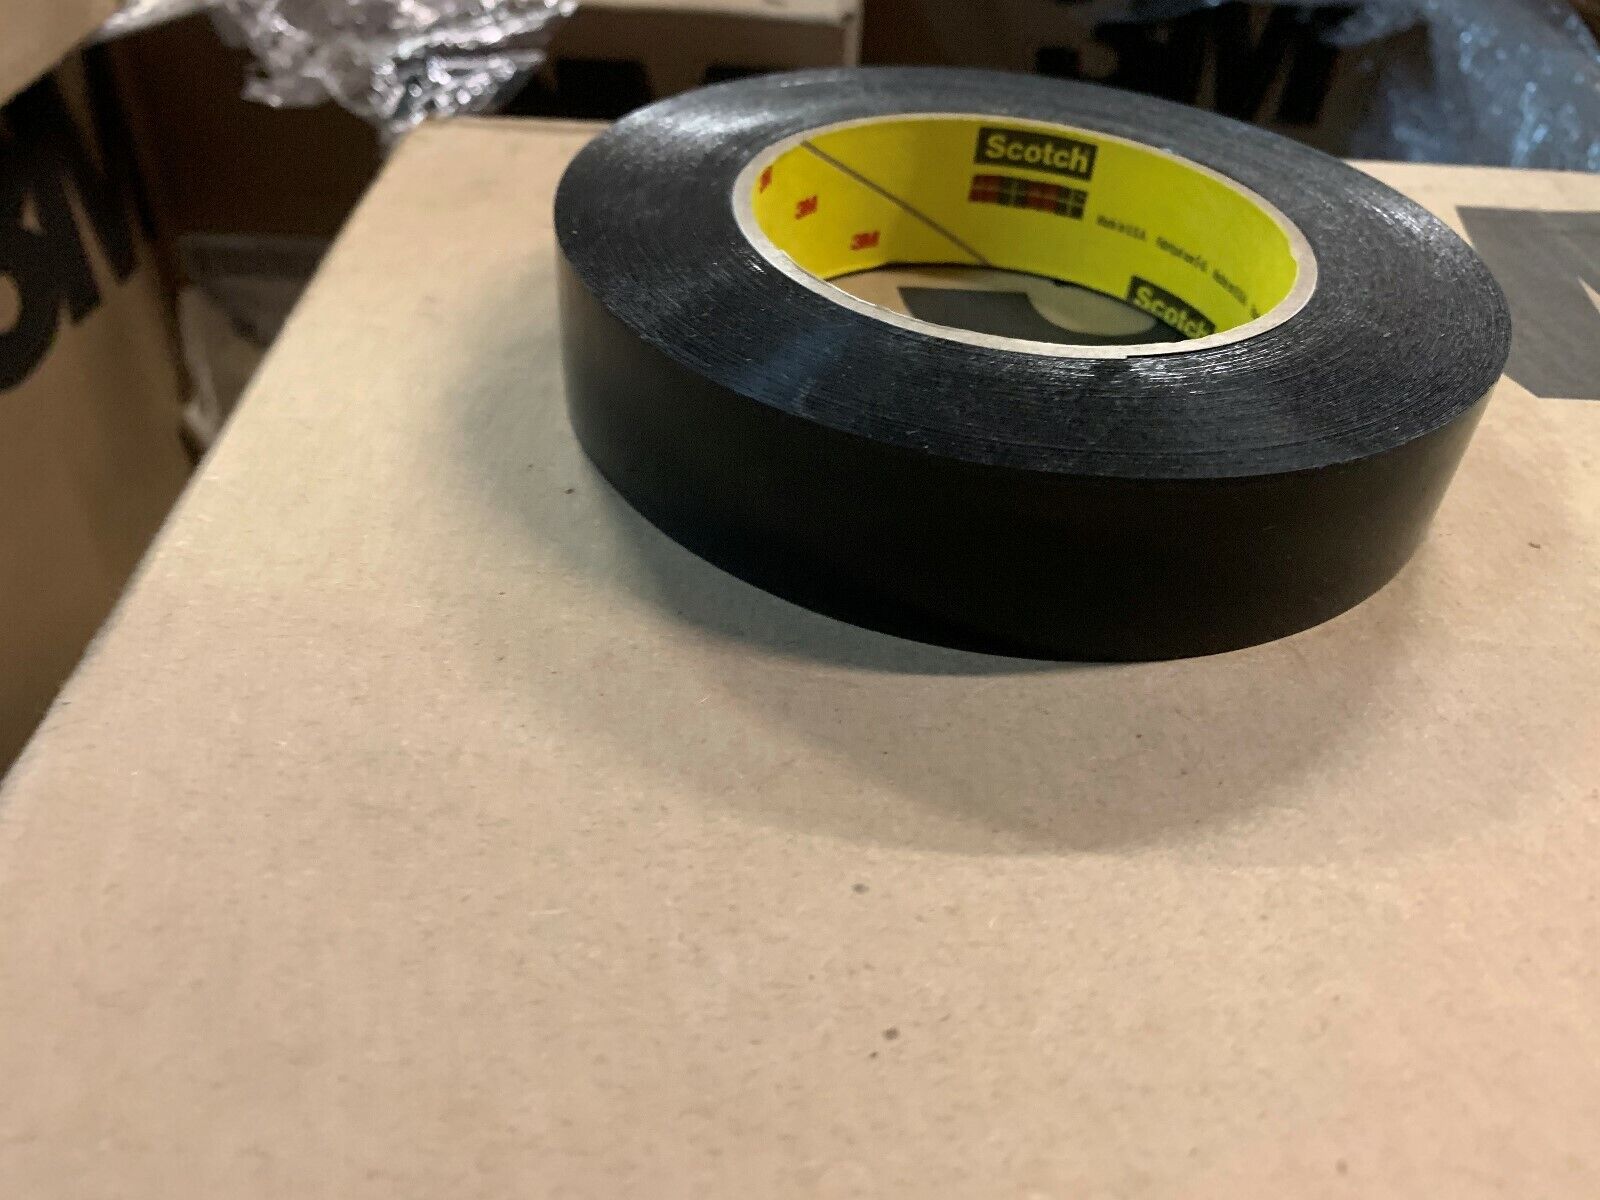 New 3M Roll of Preservation Sealing Tape 481 Black, 1 inch x 36